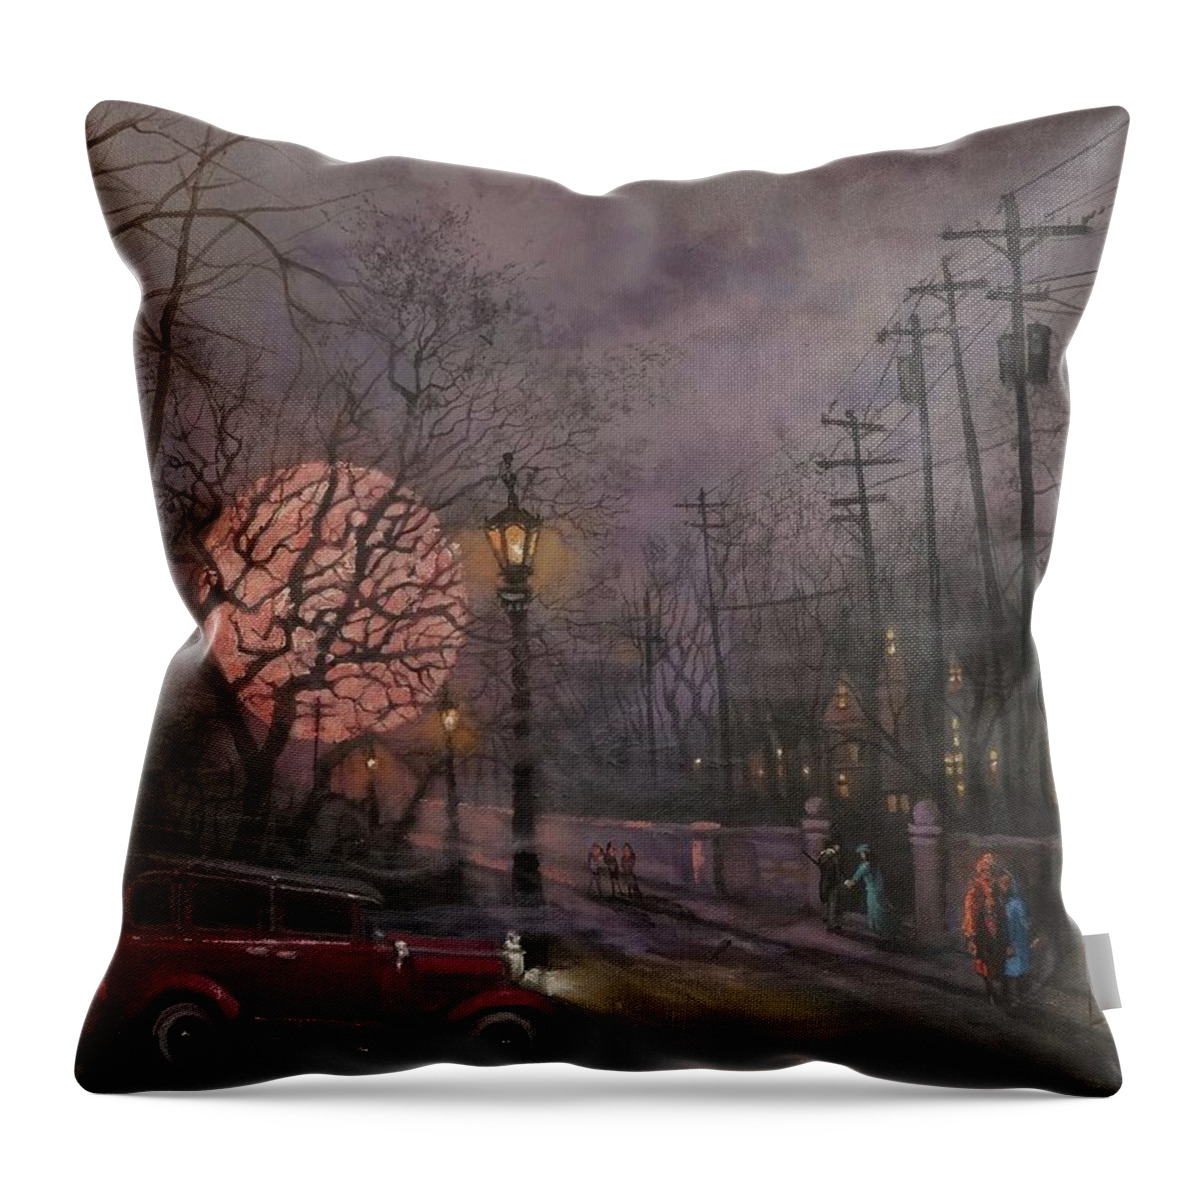 Full Moon Throw Pillow featuring the painting Nocturne In Lavender by Tom Shropshire